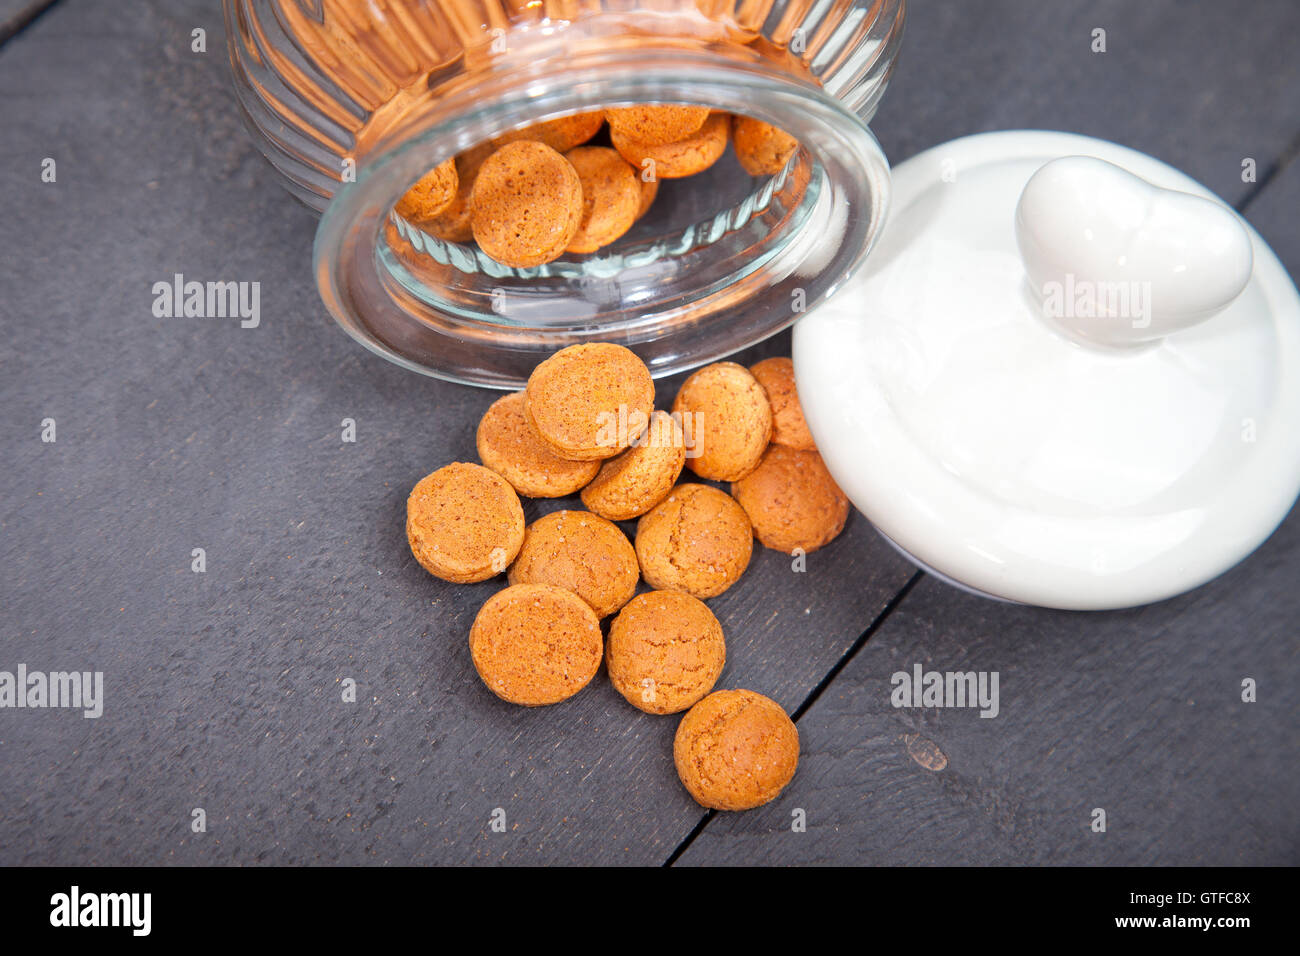 Little pile of tradtional Dutch candy pepernoten with glass jar and heart cover on black wooden background Stock Photo